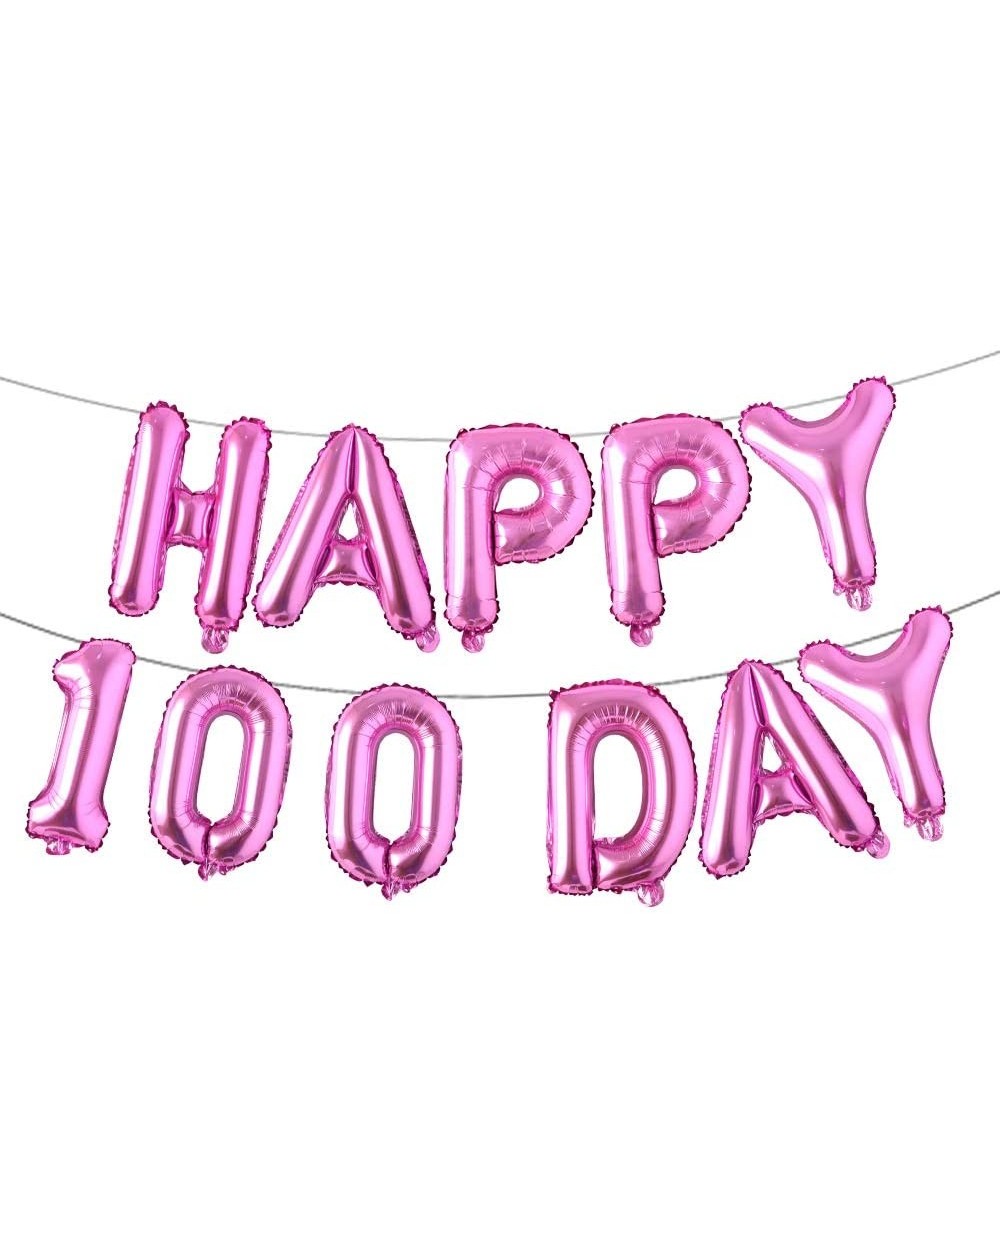 Balloons Alphabet Letters Foil Balloons Set Happy 100 Day Banner Baby Shower Birthday Party Decoration Supplies (Rose Red) - ...